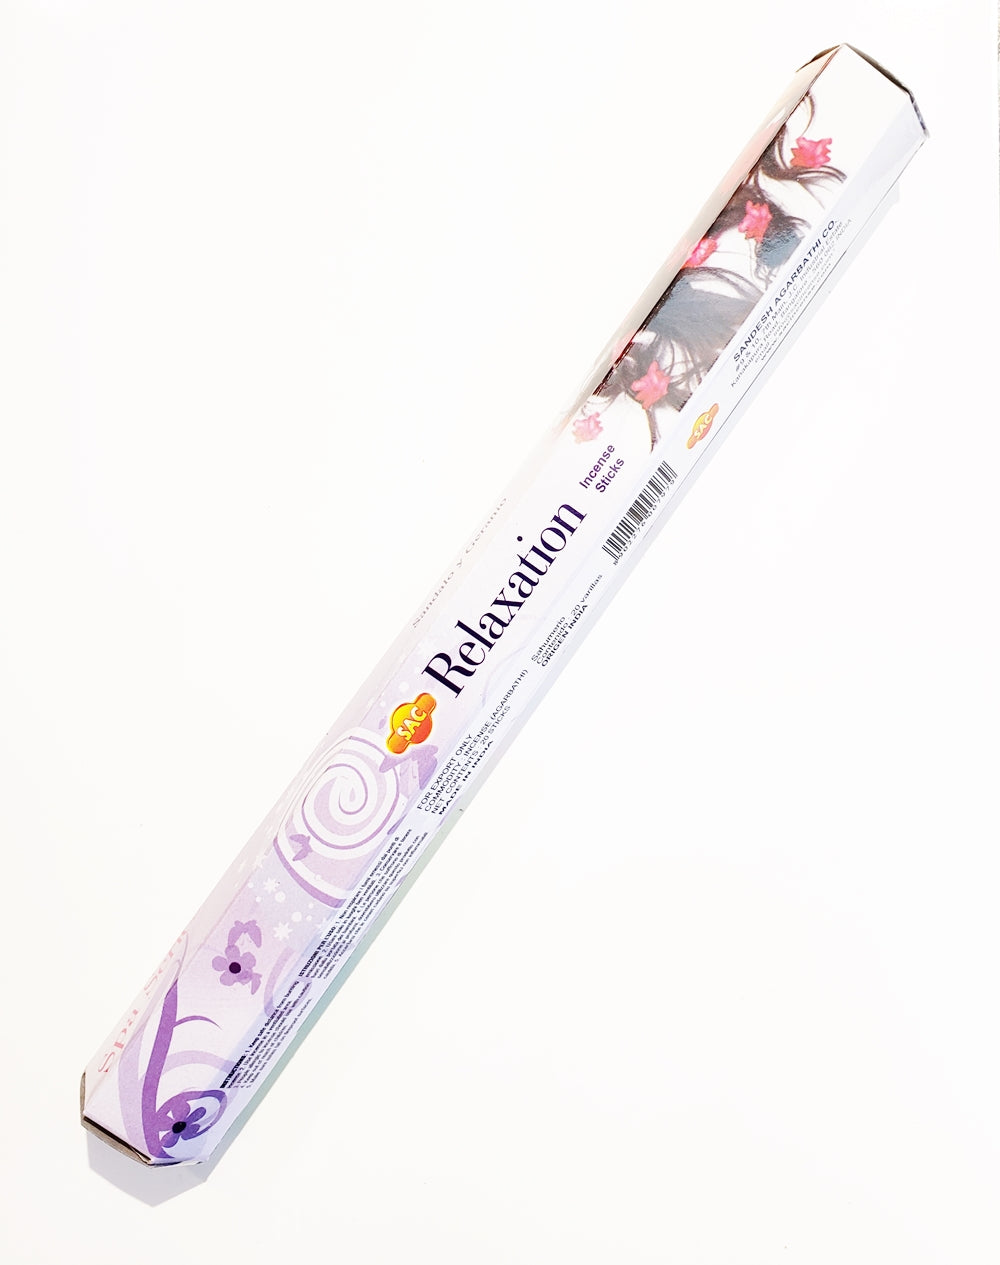 Spa Series Relaxation Incense Sticks